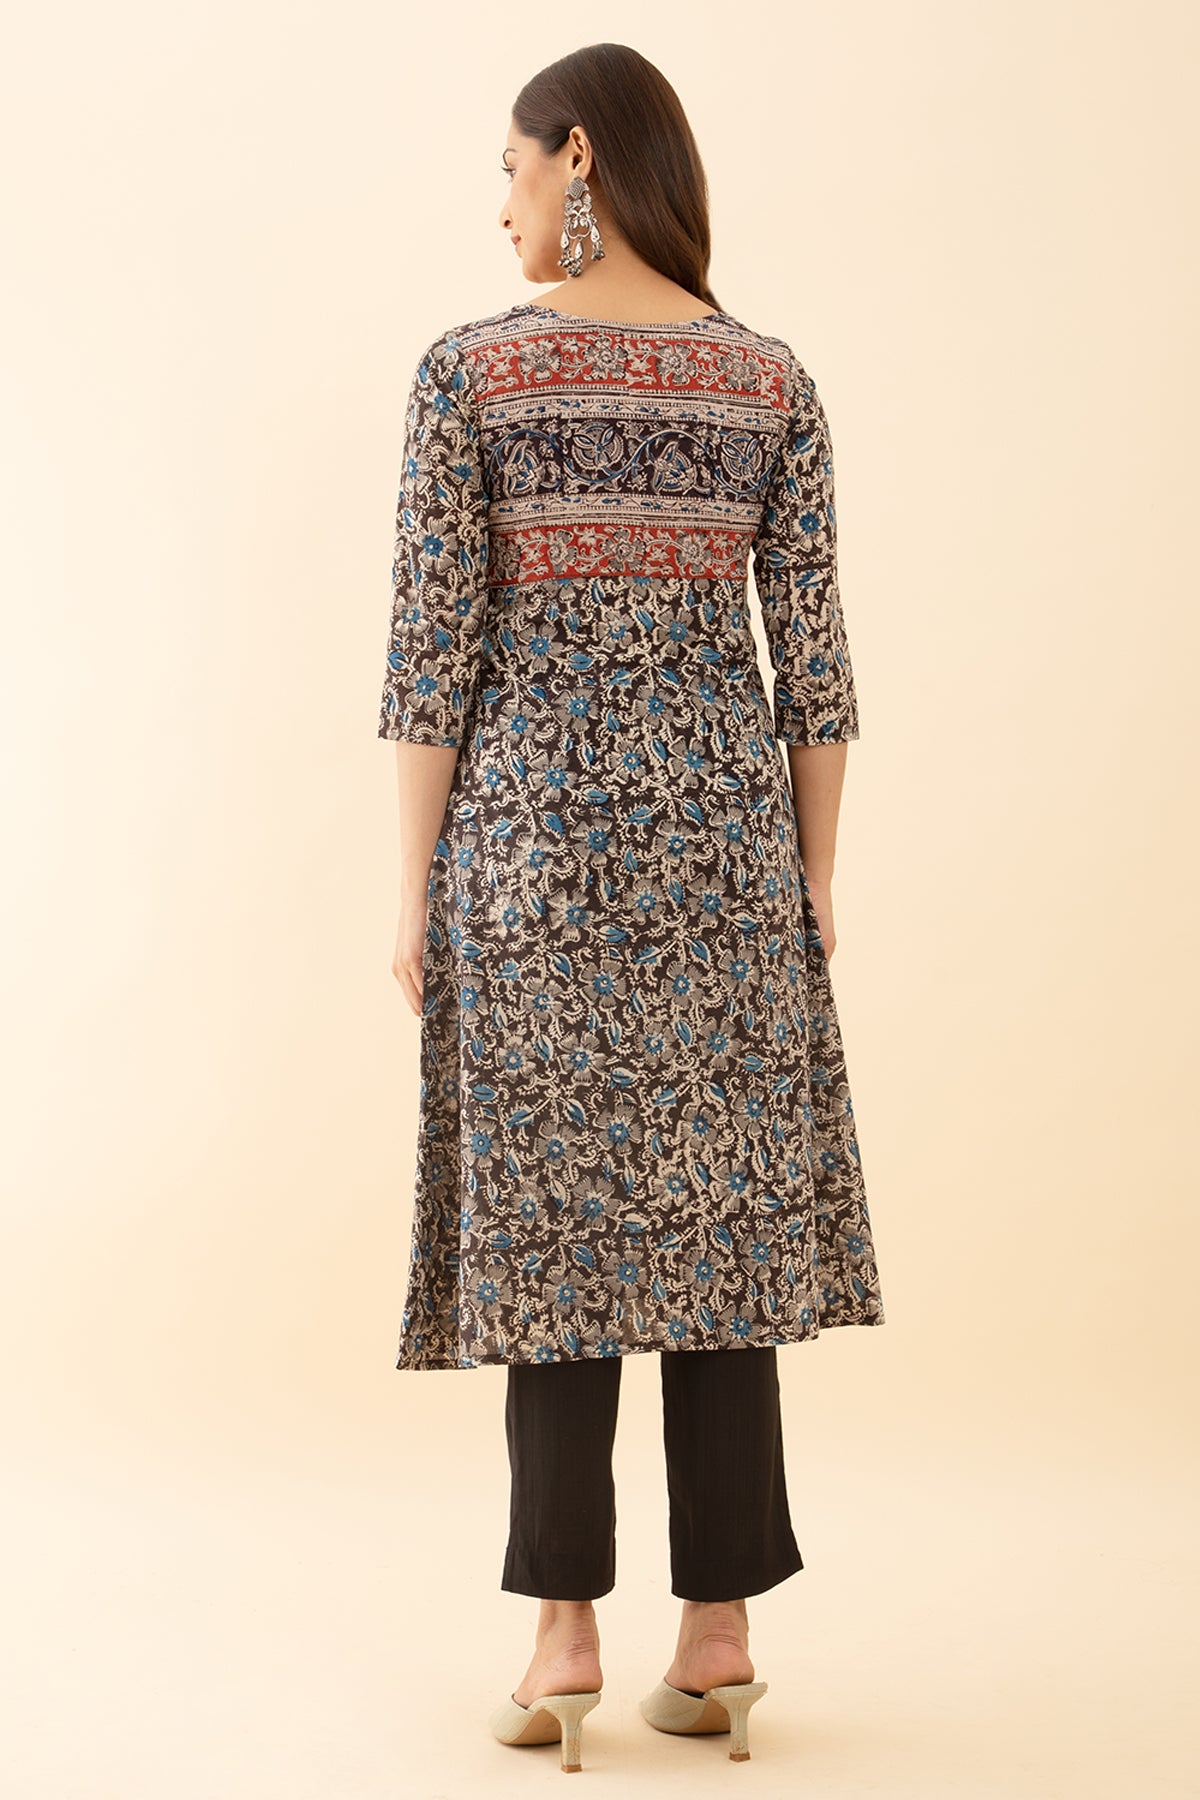 Classic Black Kurta with Ditsy Floral Print with Button